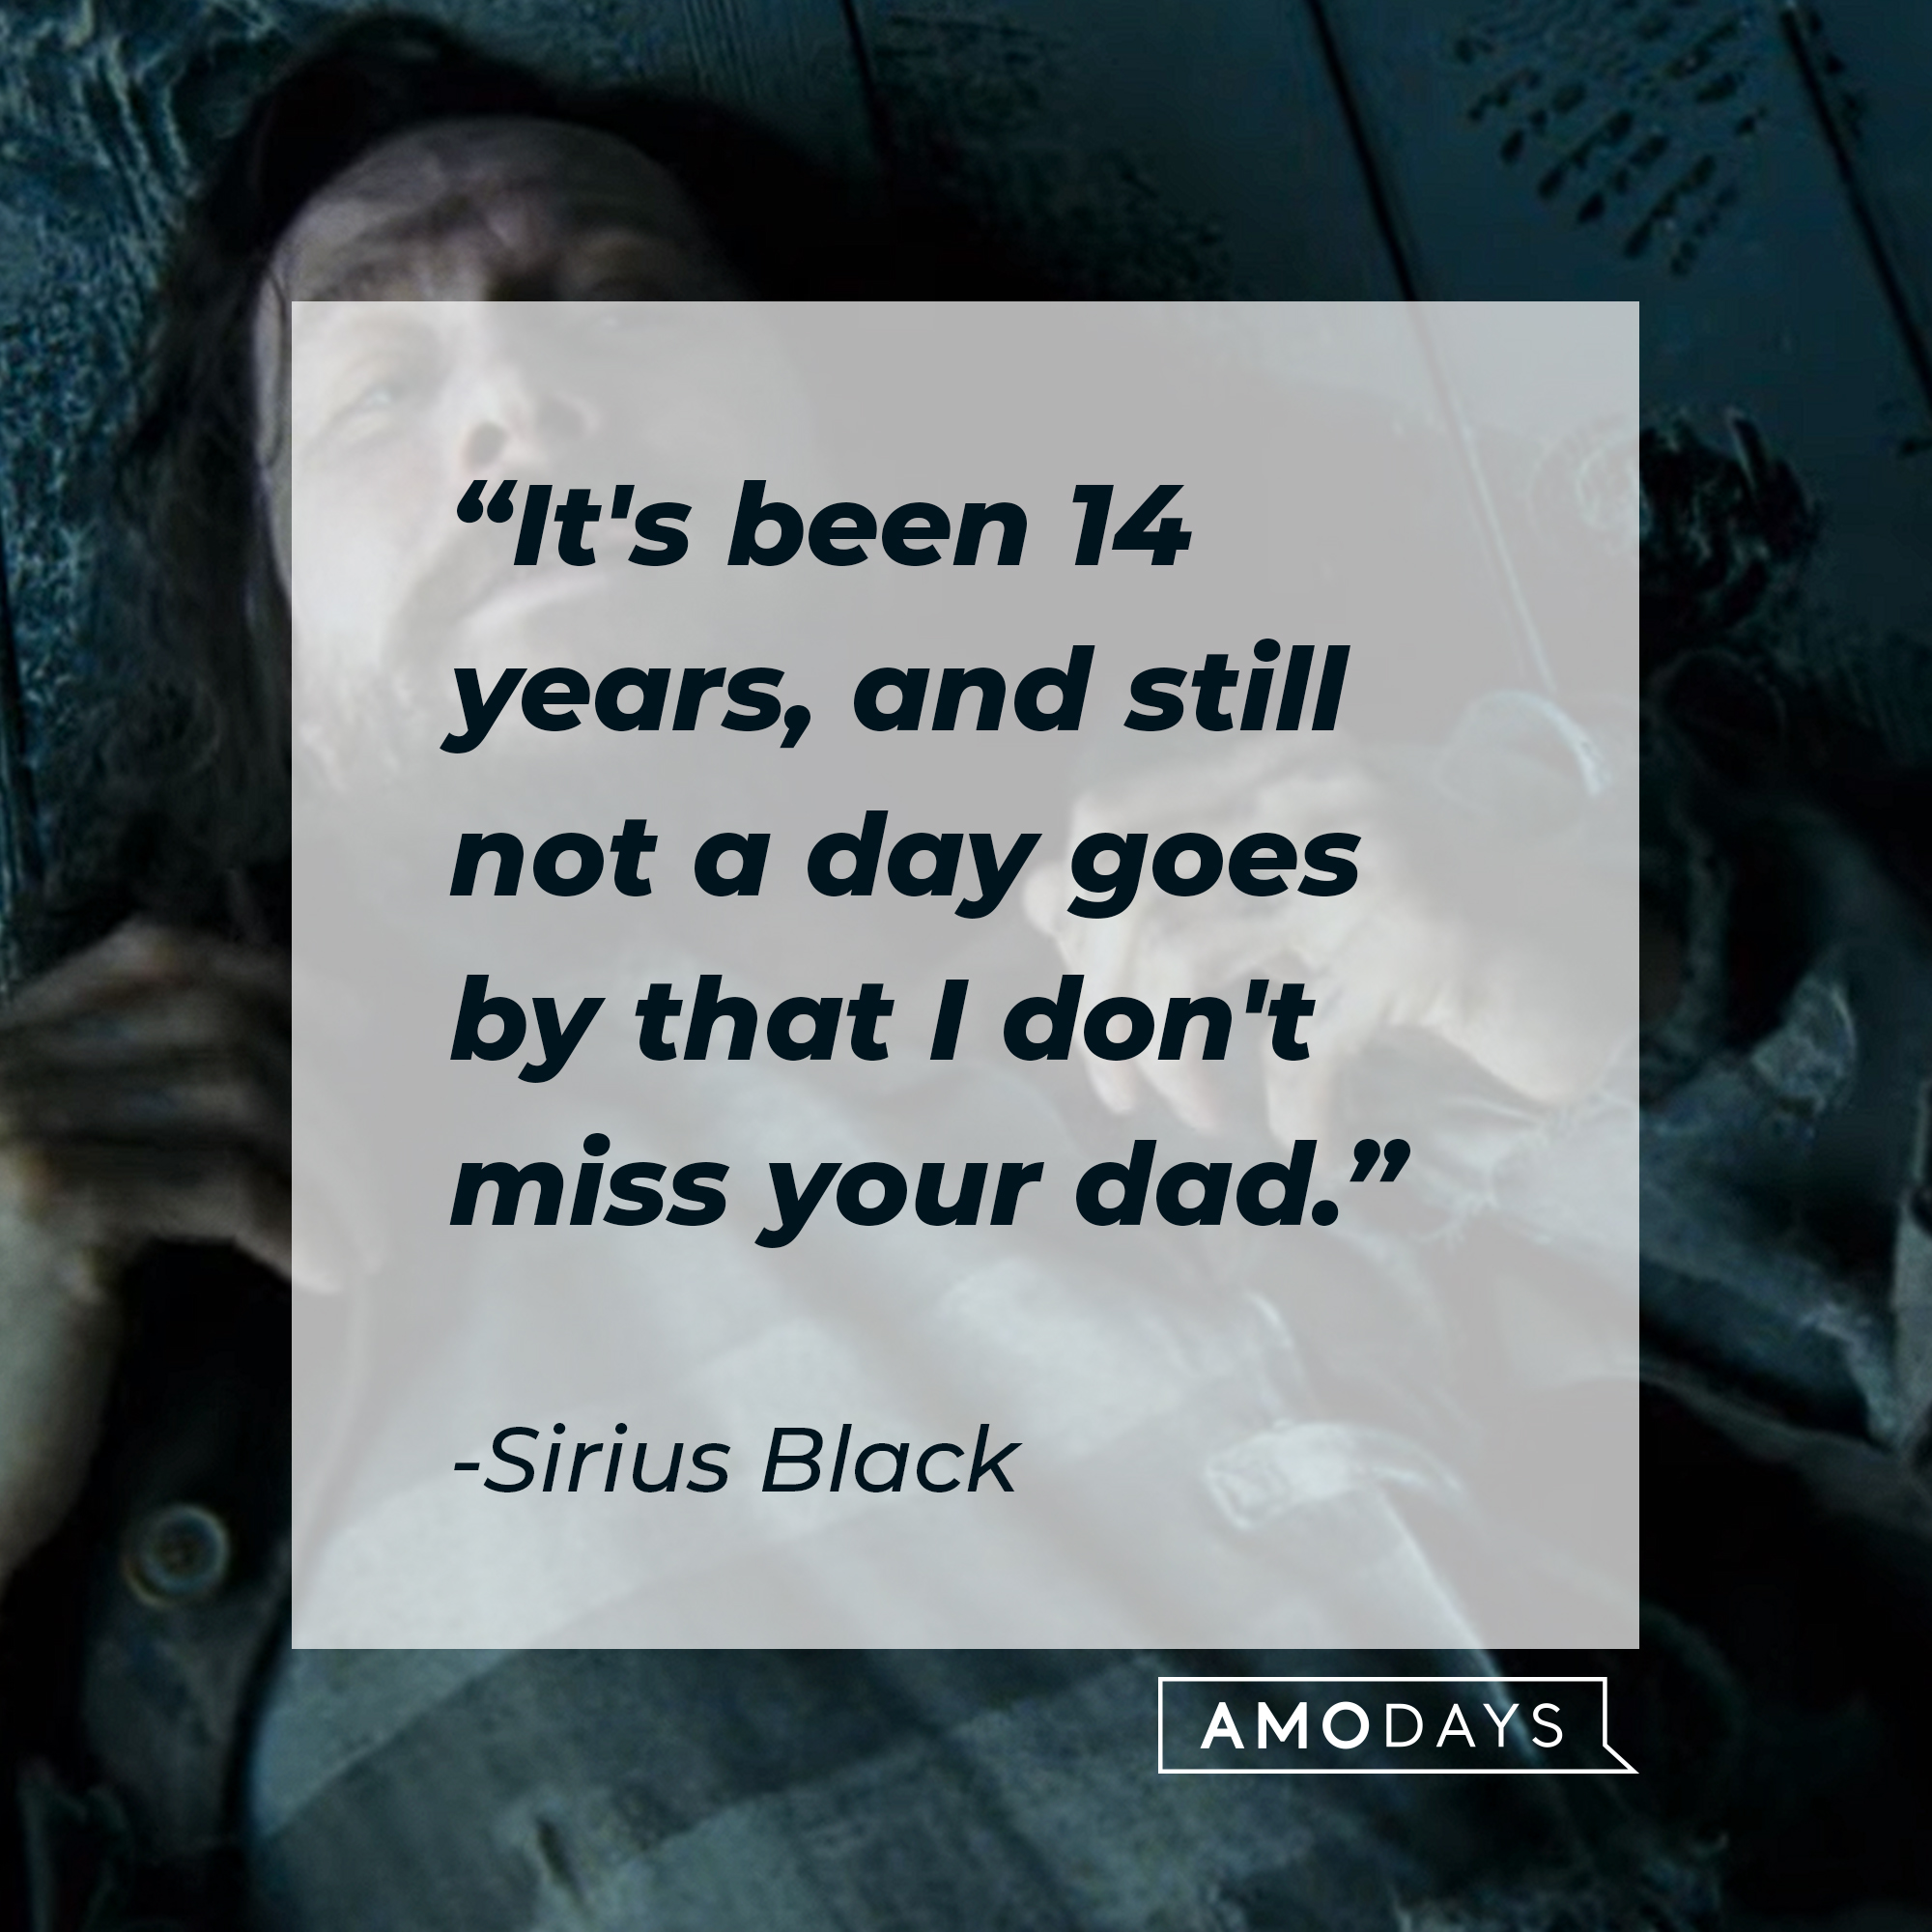 Sirius Black's quote: "It's been 14 years, and still not a day goes by that I don't miss your dad." | Source: YouTube/harrypotter